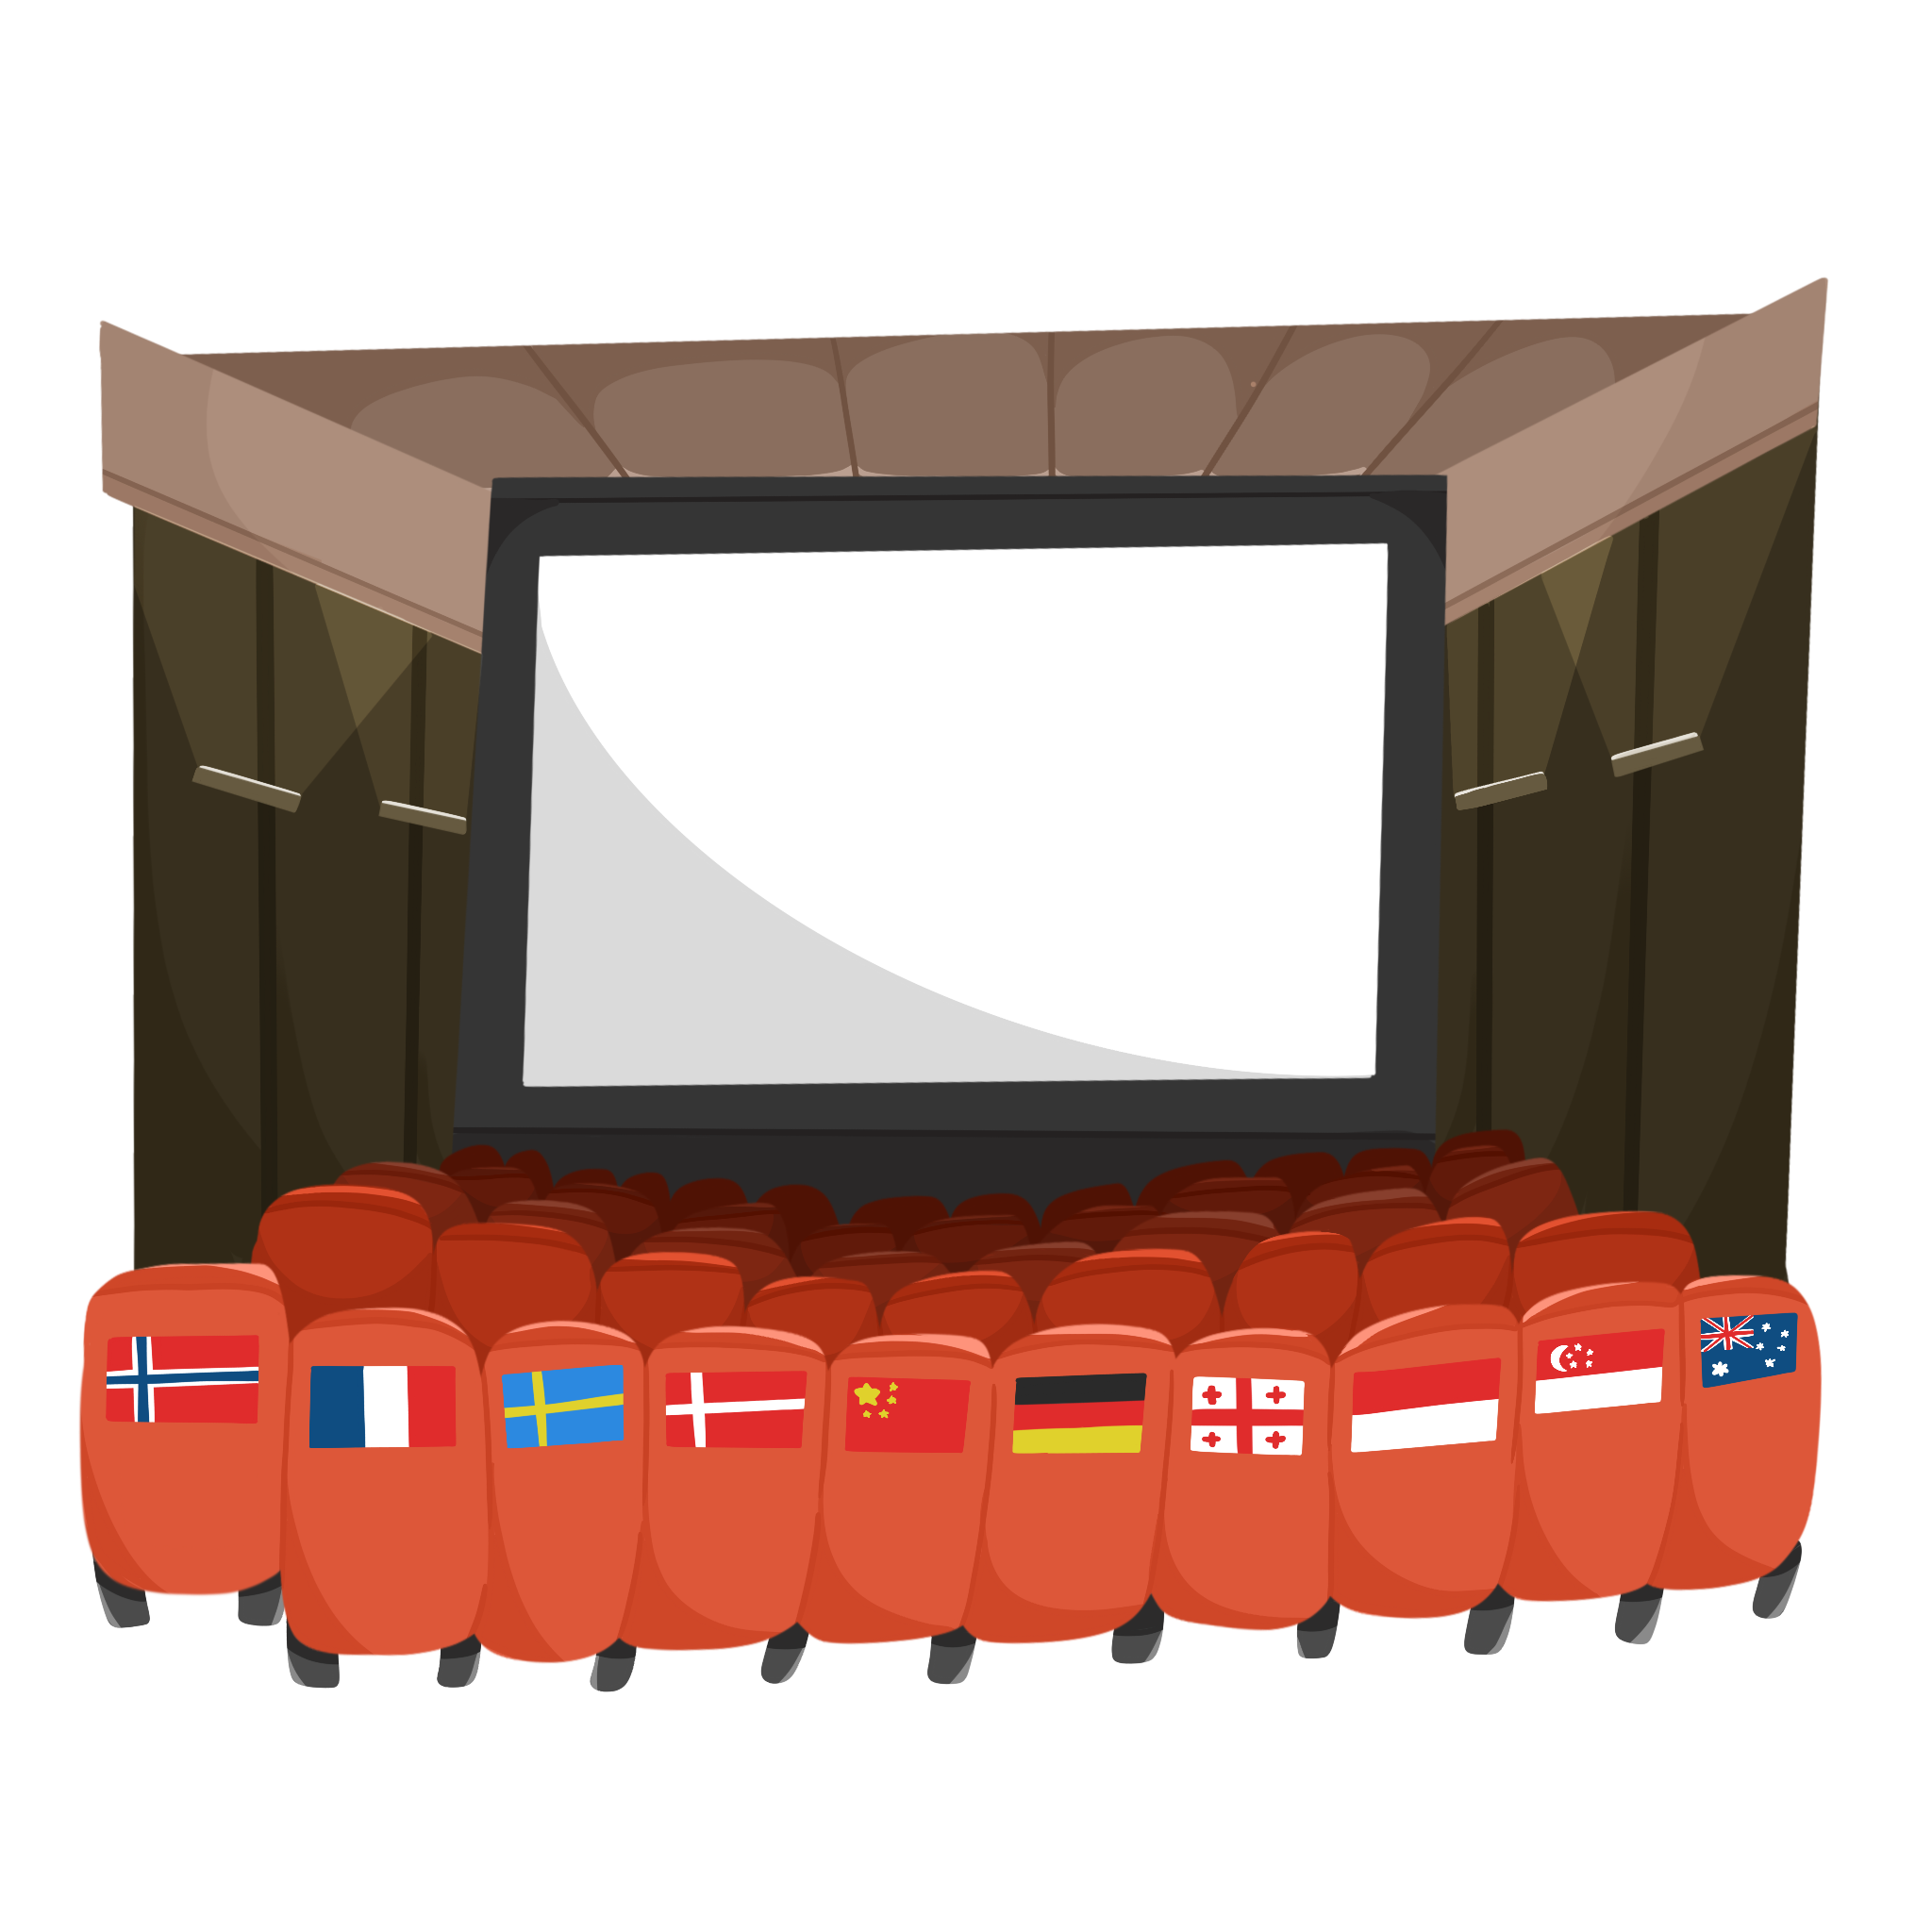 Illustration of a movie theatre with rows of red seats. On the backs of one row of seats are the flags of Norway, France, Sweden, Denmark, China, Germany, Georgia, Singapore, Indonesia, and Australia